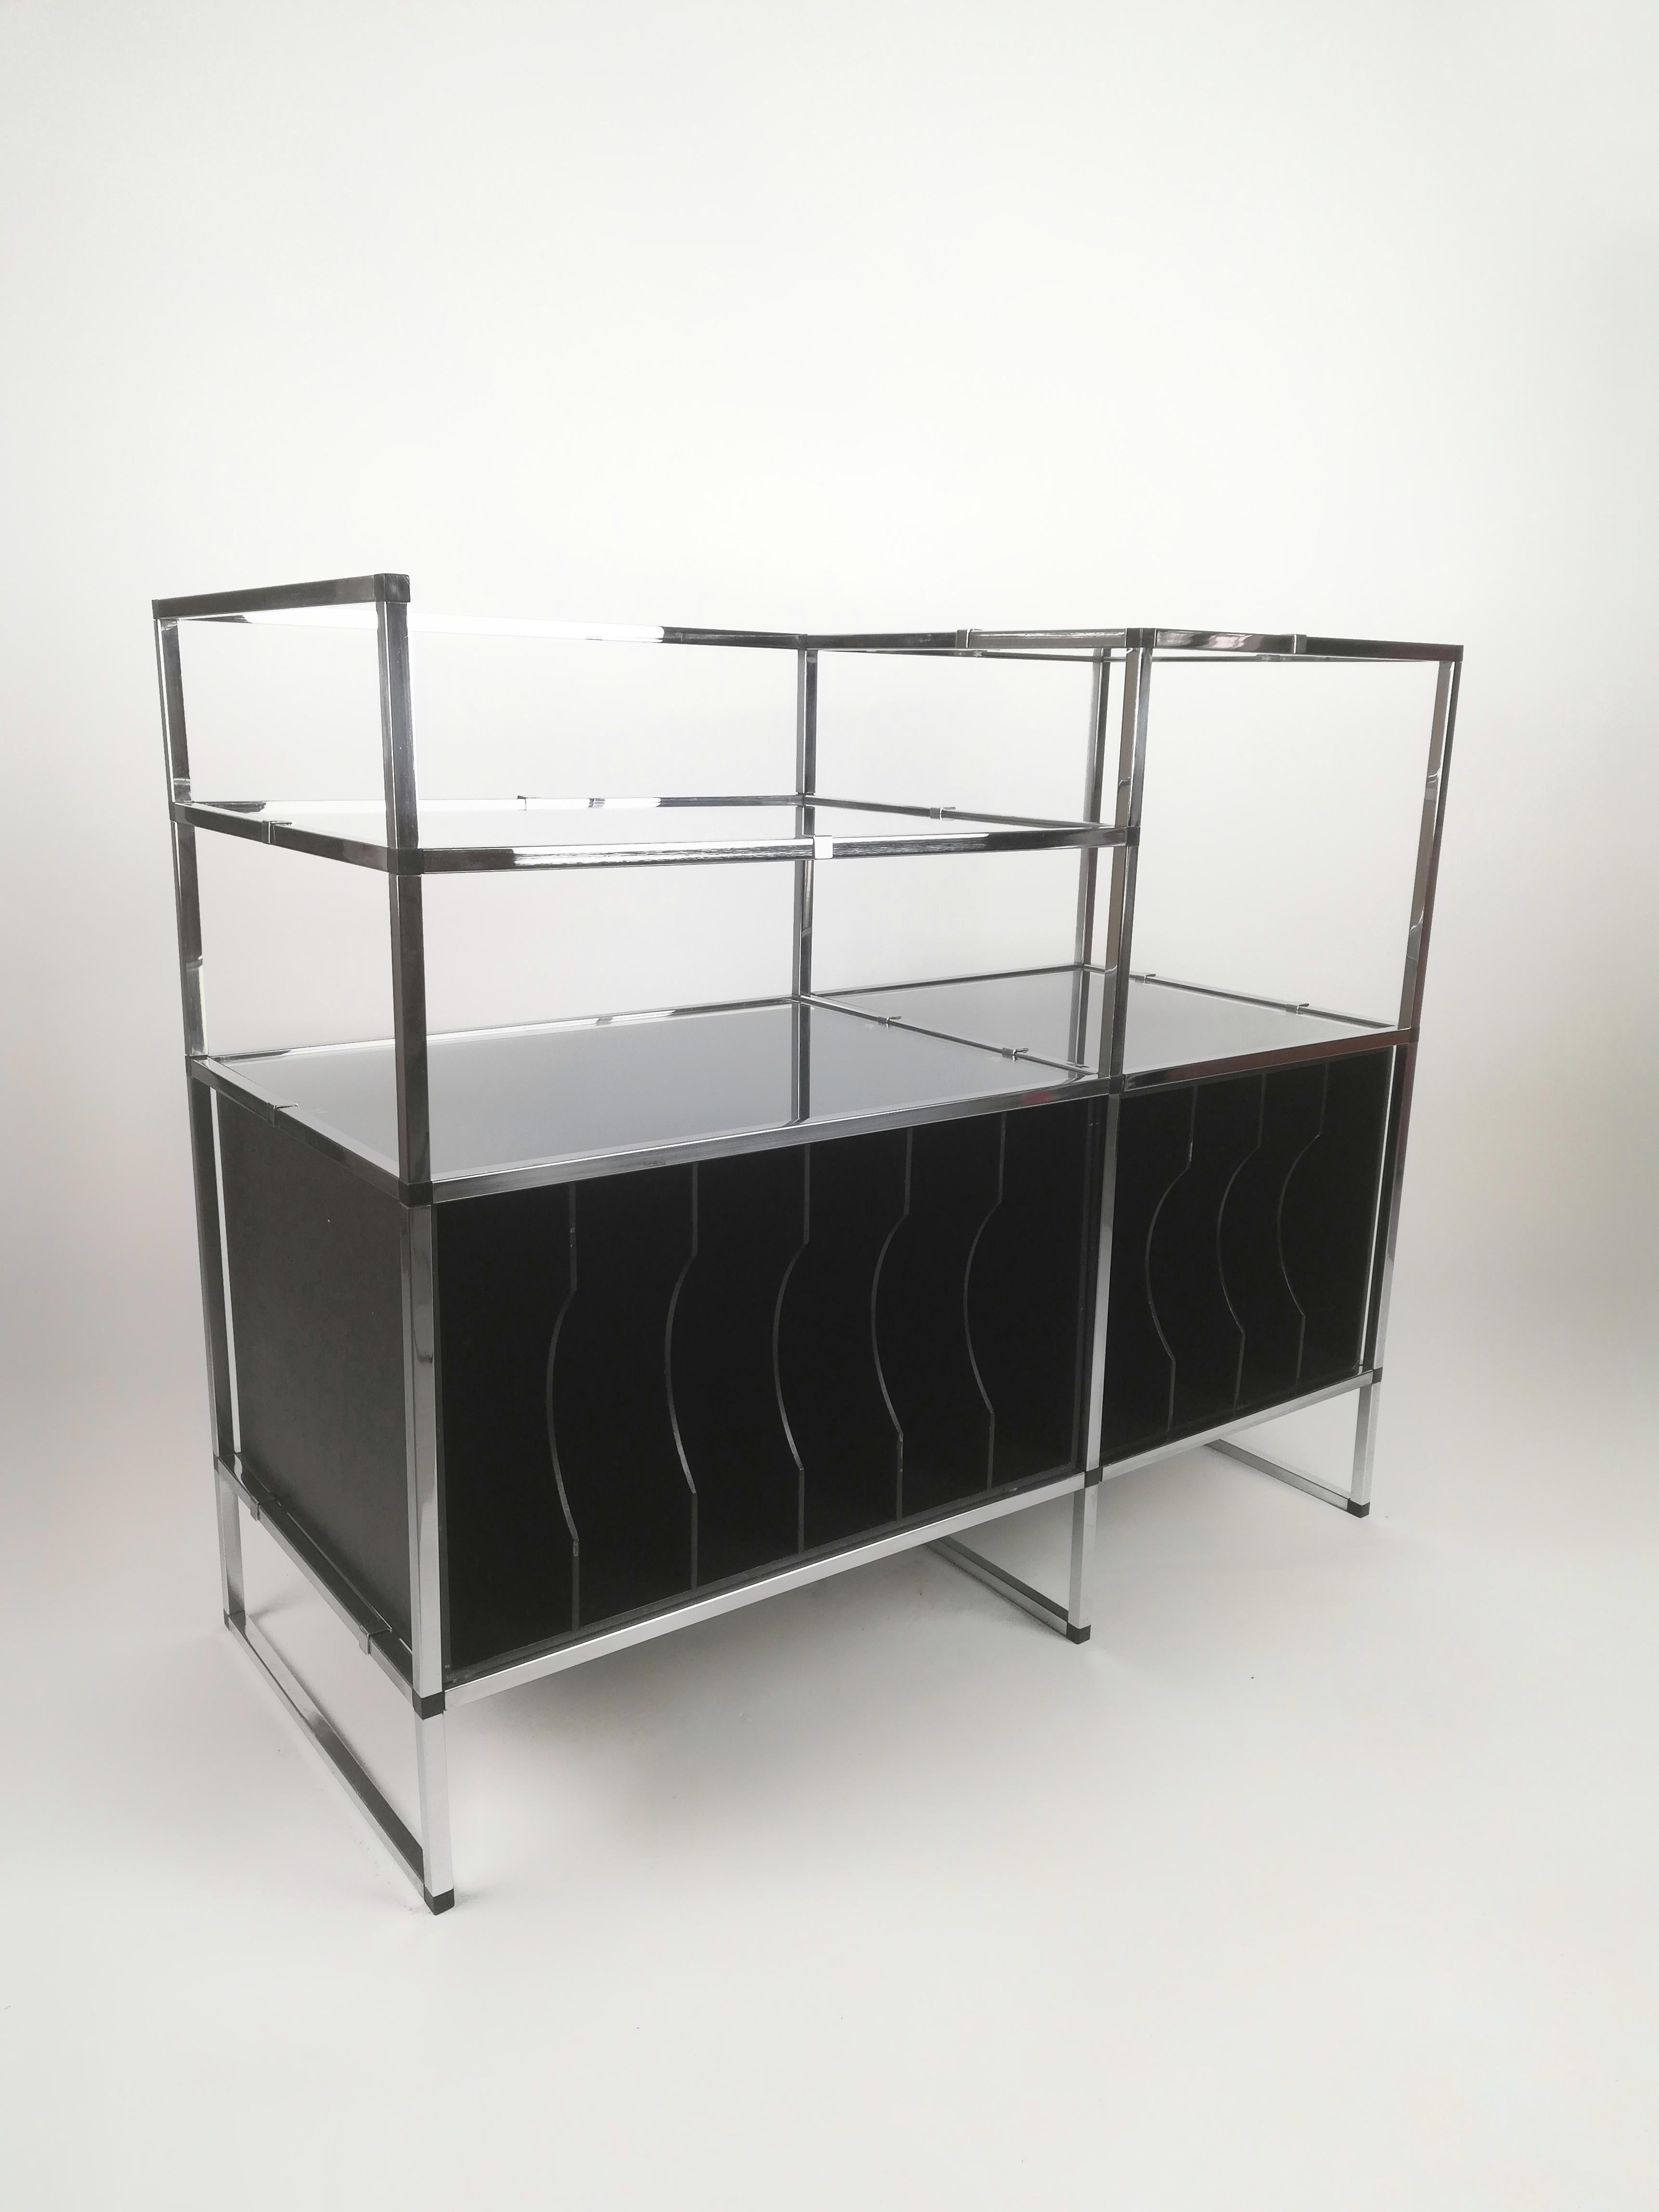 A Vintage Record Player Stand and vinyl storage but also an étagère or a consolle table if you remove the plywood cases for vinyl records. 
It was made in Italy during the 1970s using chromed metal parts joined together with small abs dices.
The